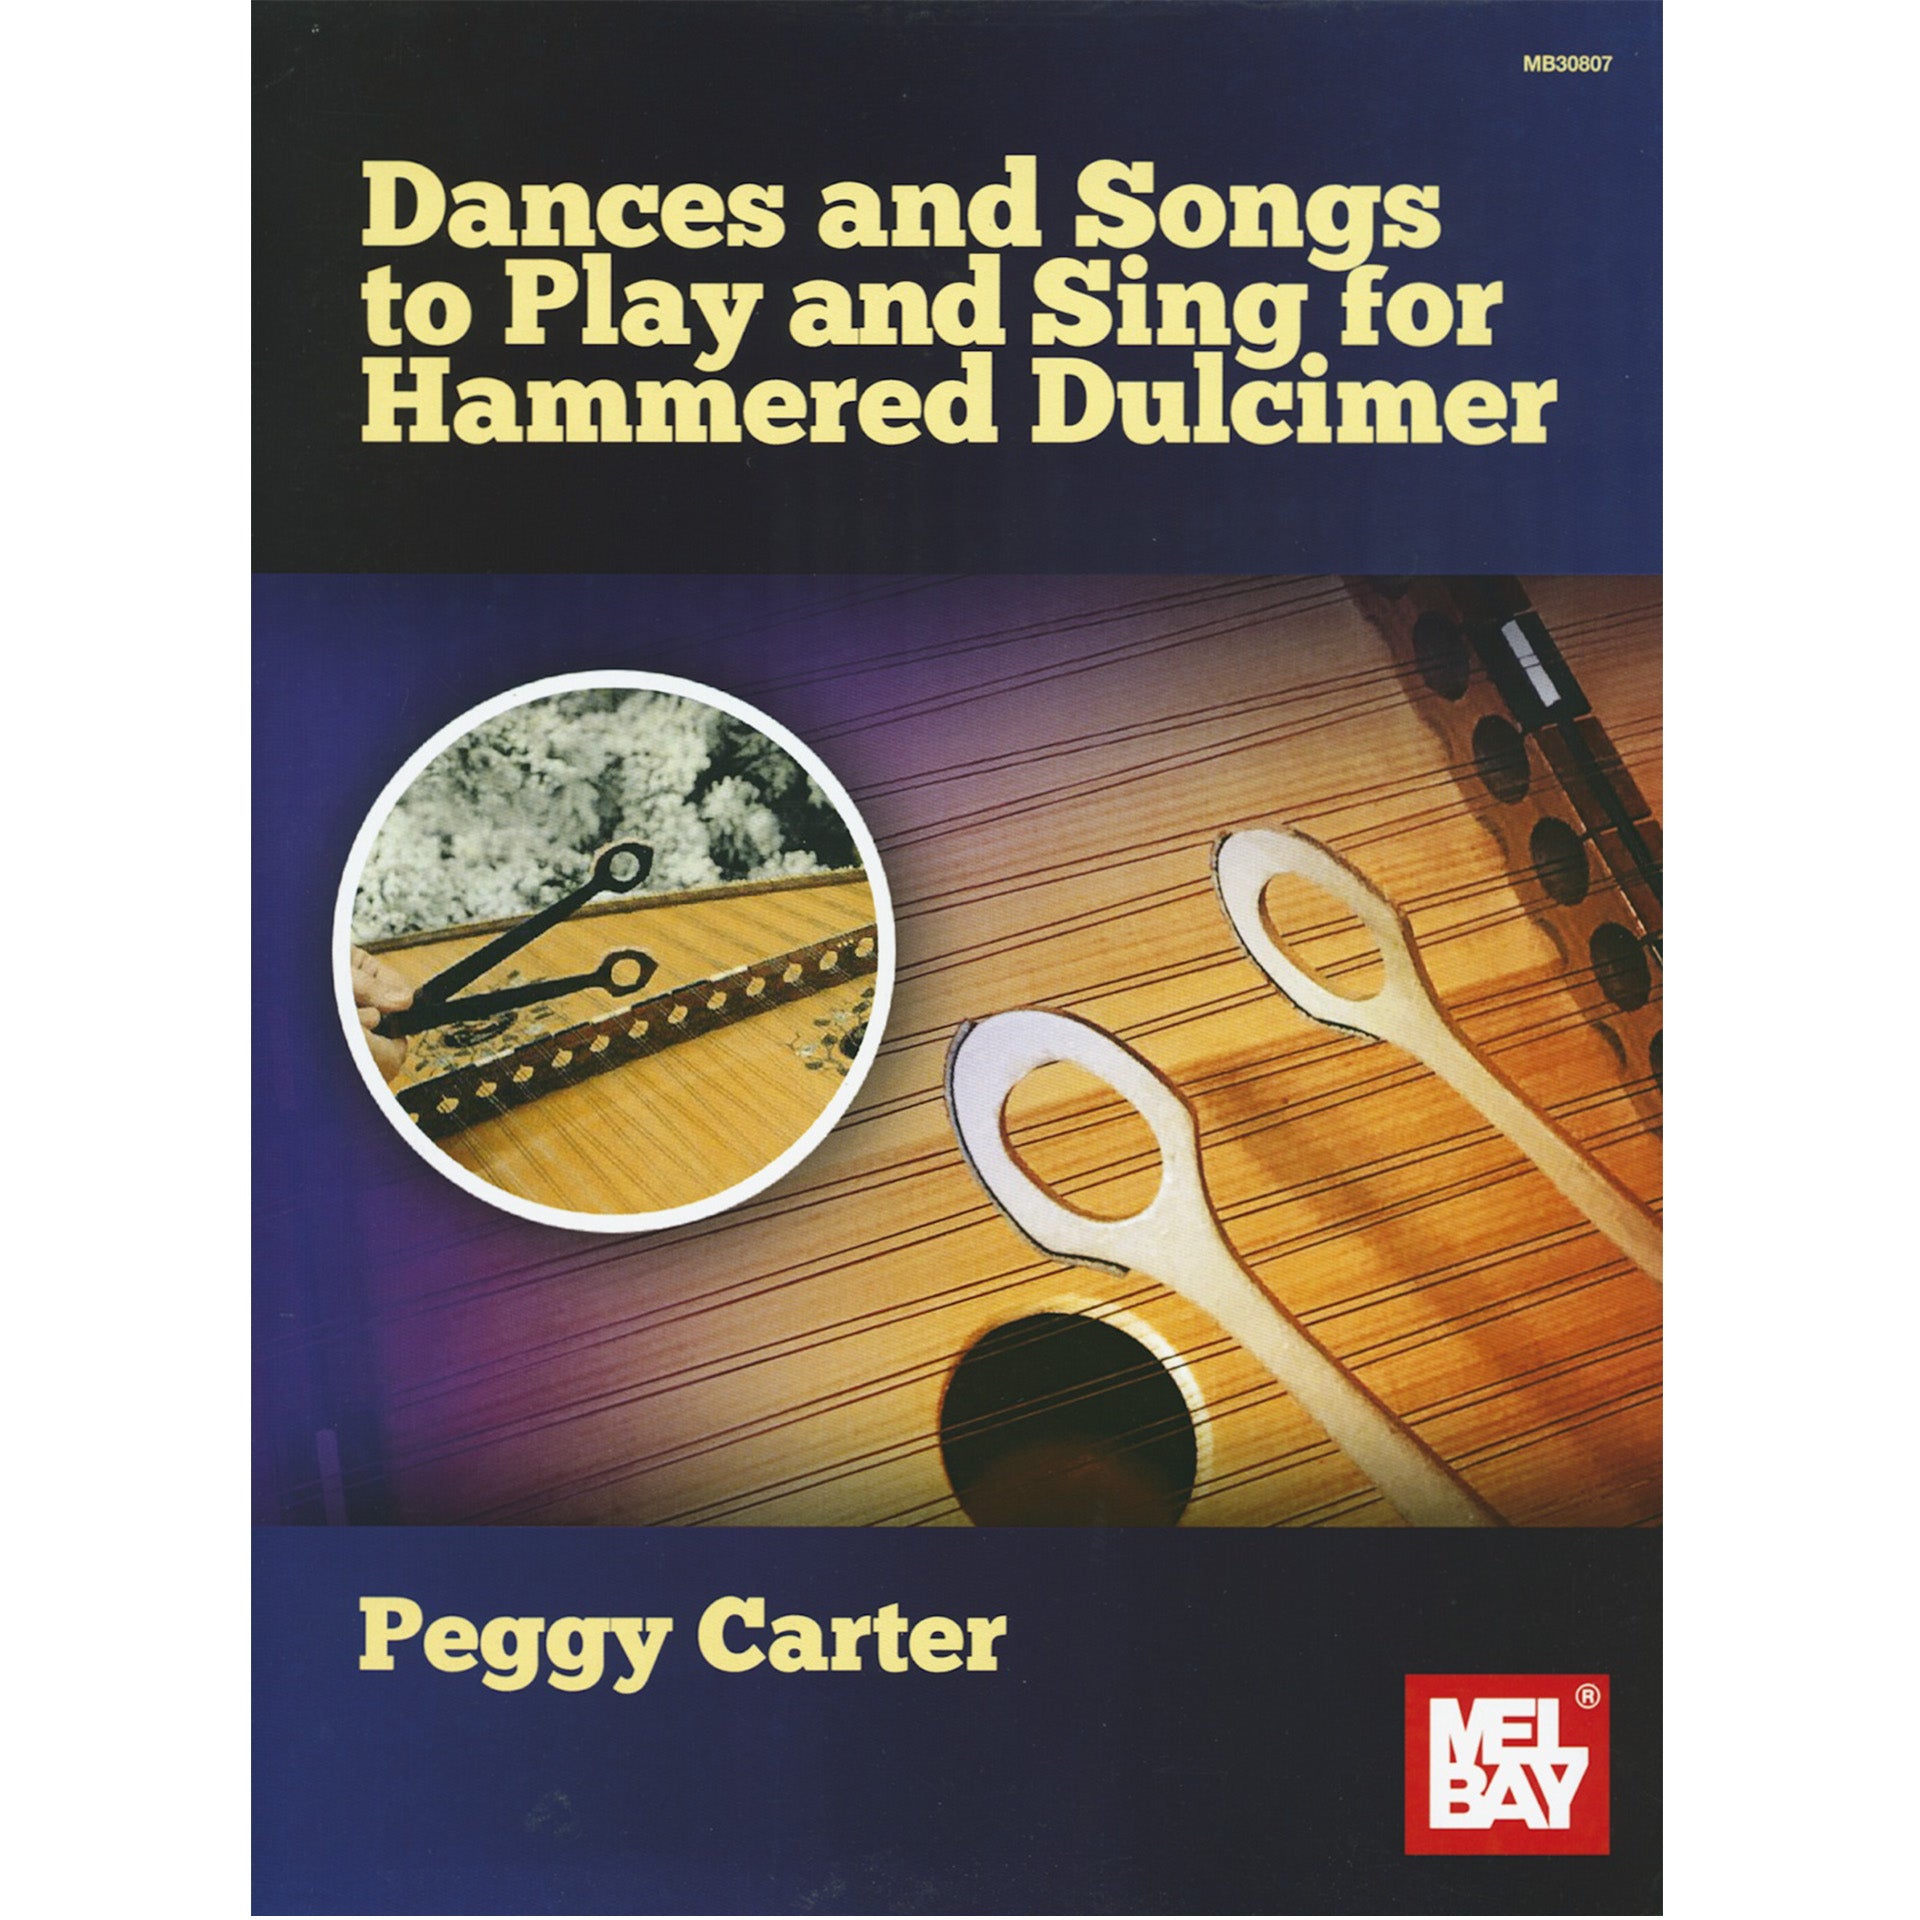 Image 1 of Dances and Songs to Play and Sing for Hammered Dulcimer - SKU# 02-30807 : Product Type Media : Elderly Instruments